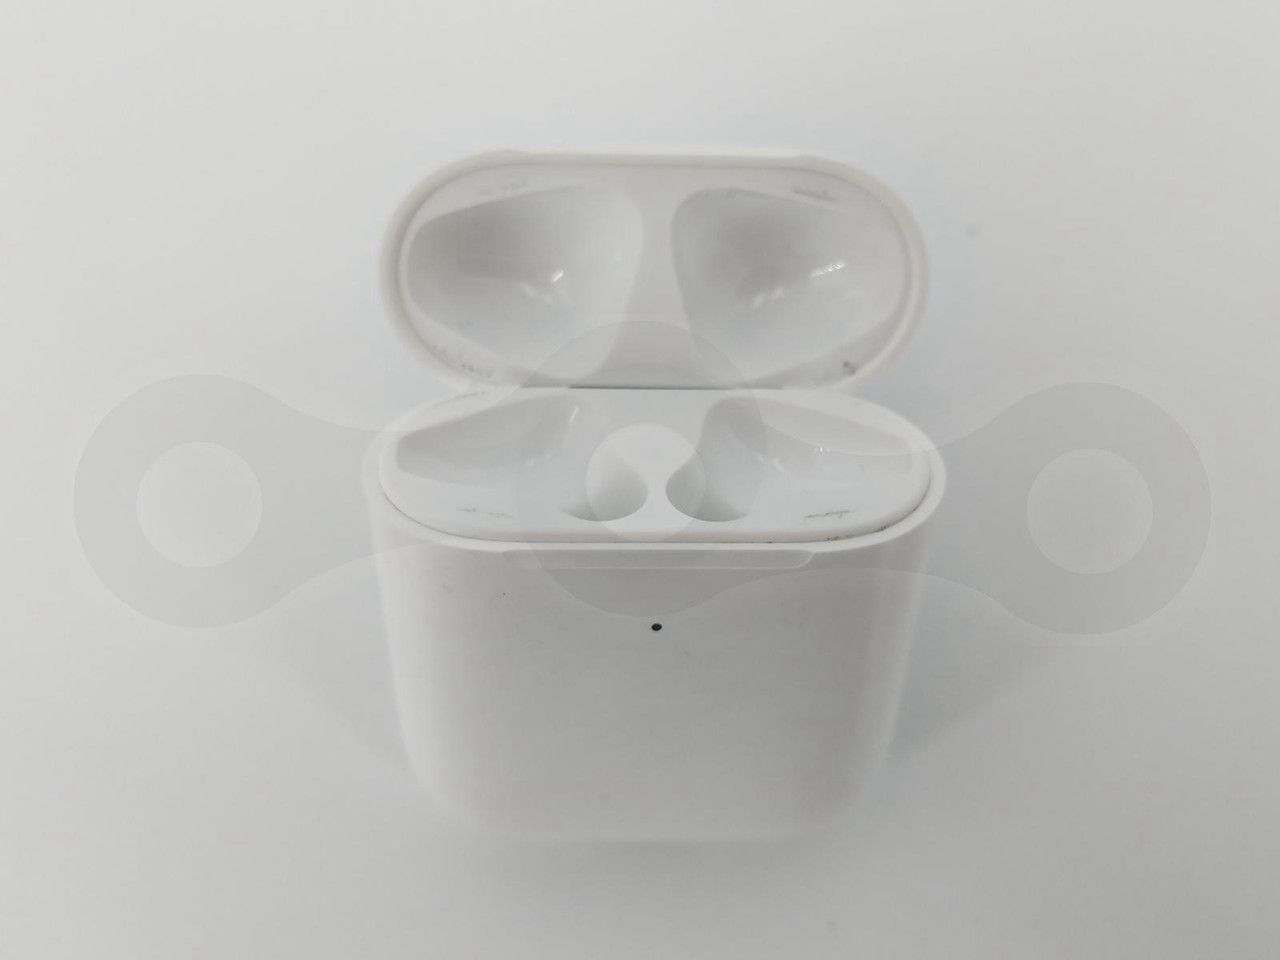 APPLE AIRPODS 2ND GENERATION GENUINE CHARGING CASE ONLY A1938 REPLACEMENT  WHITE